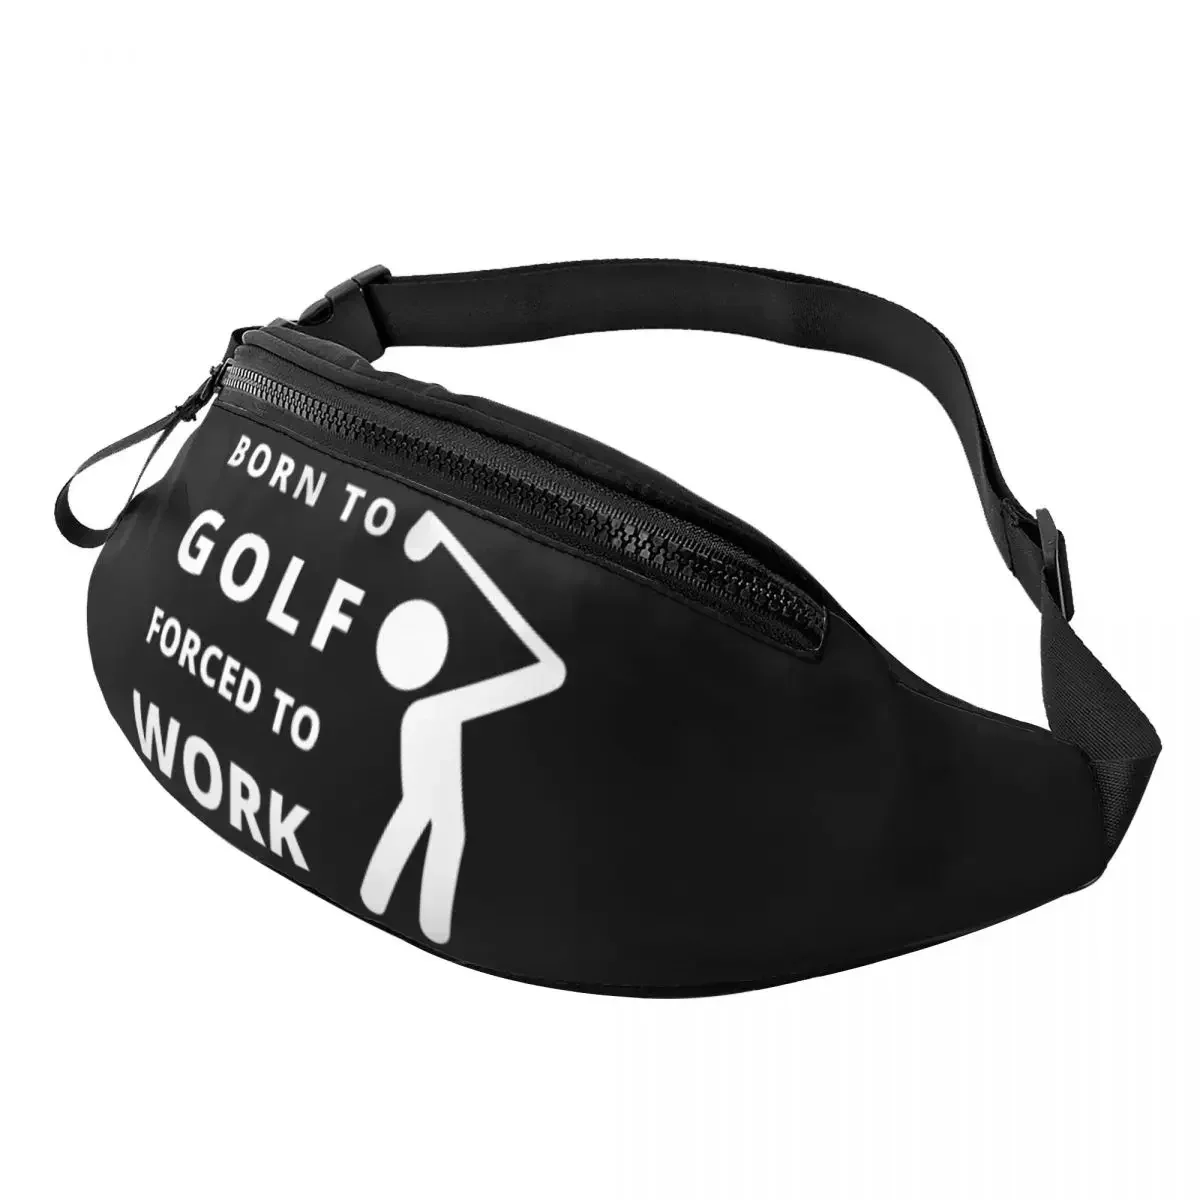 

Born To Golf Forced To Work Fanny Pack Men Women Cool Crossbody Waist Bag for Camping Biking Phone Money Pouch